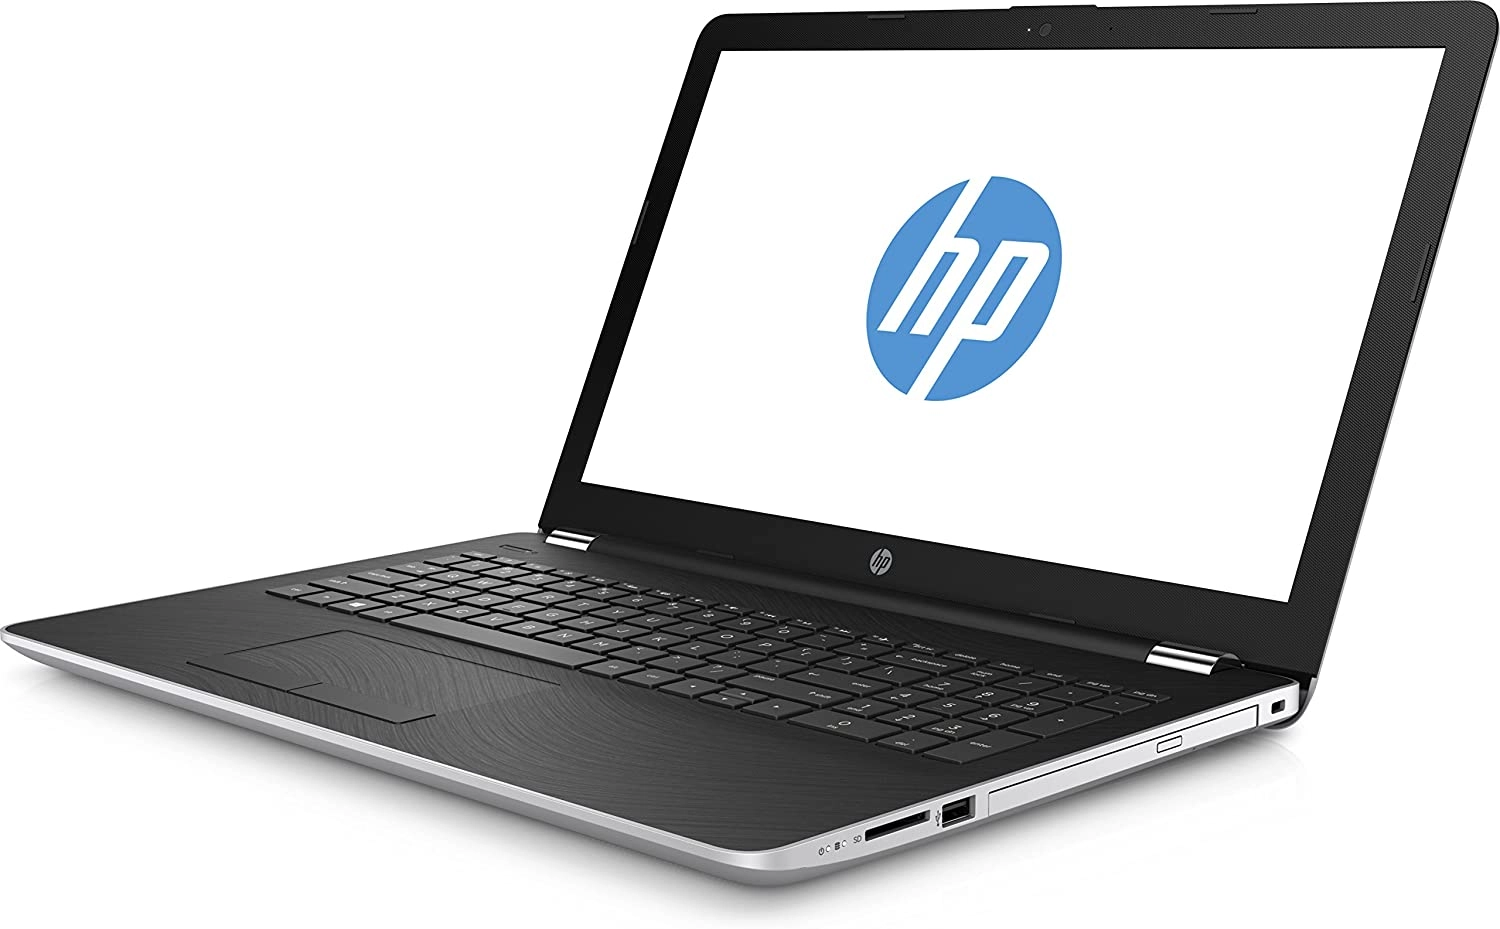 HP 15-bs129ns laptop image